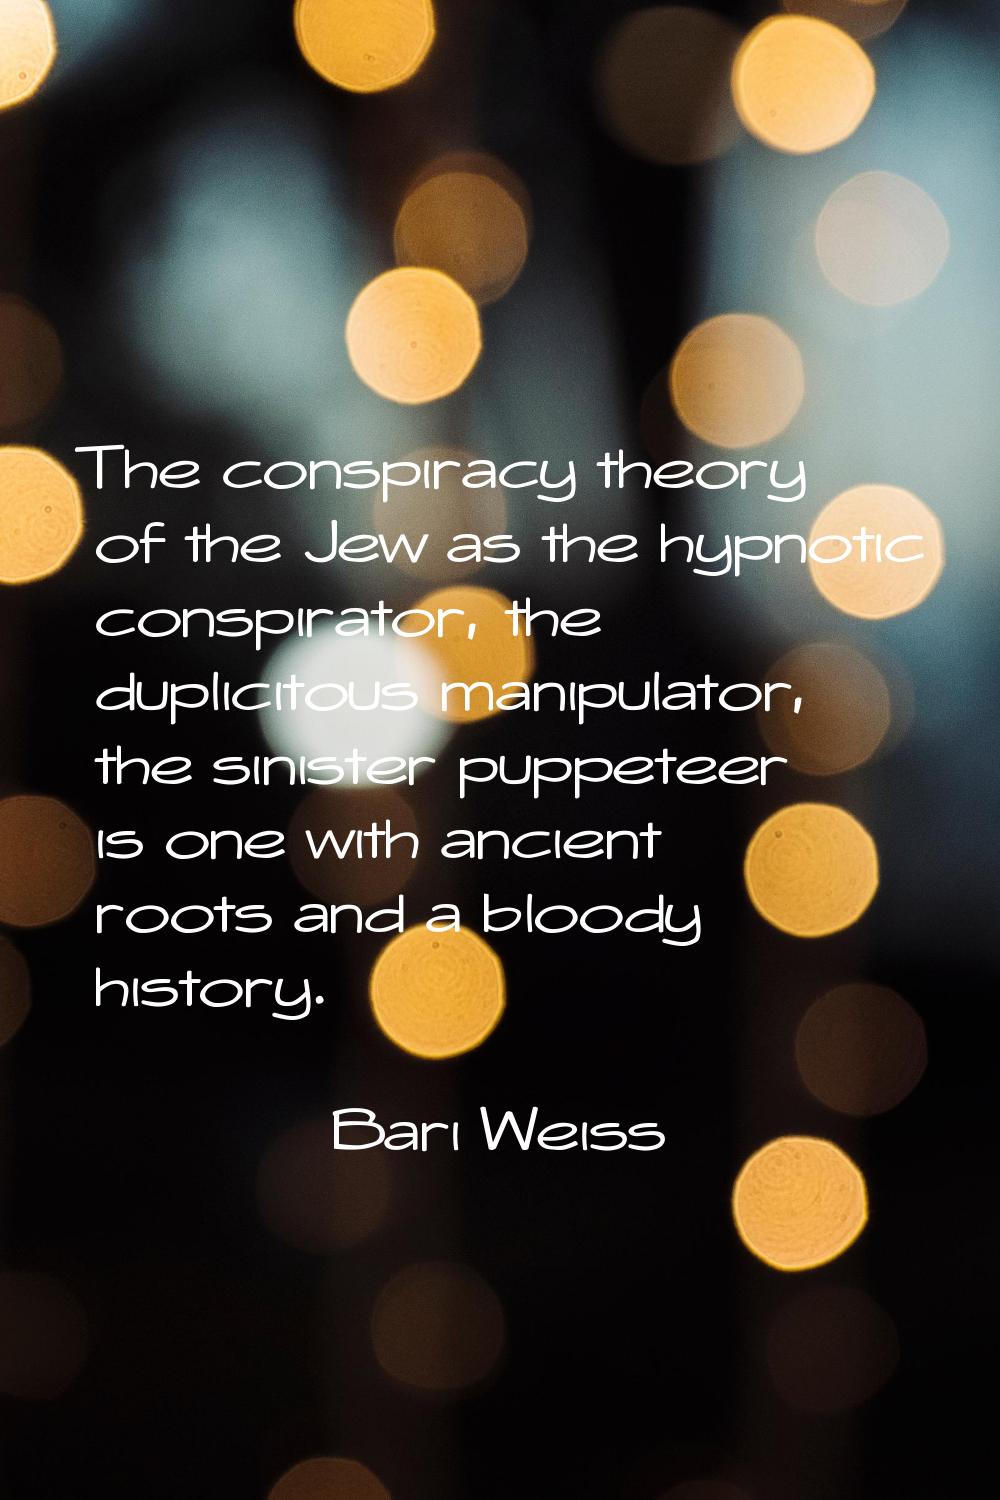 The conspiracy theory of the Jew as the hypnotic conspirator, the duplicitous manipulator, the sini